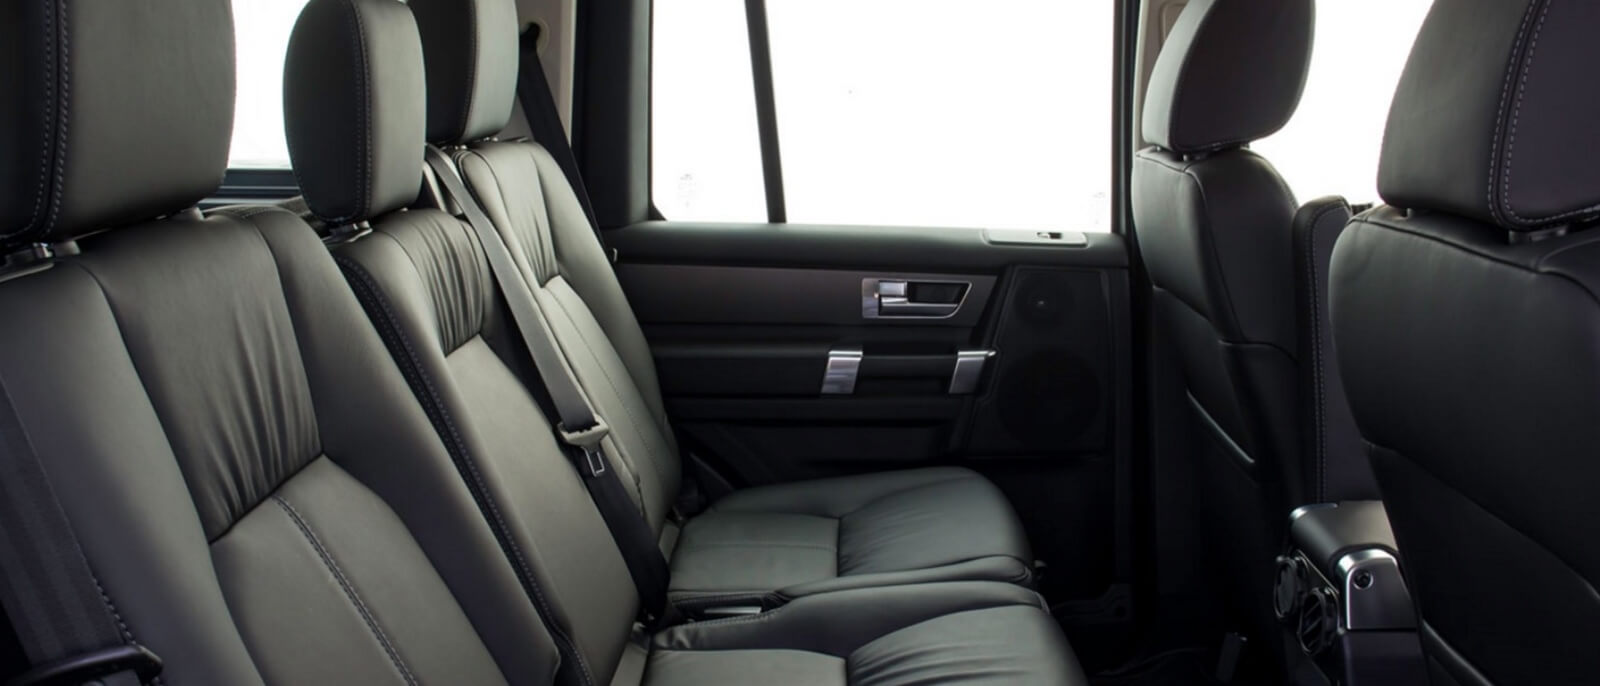 Balanced Performance and Space in a 2016 LR4 || Land Rover Gulf Coast